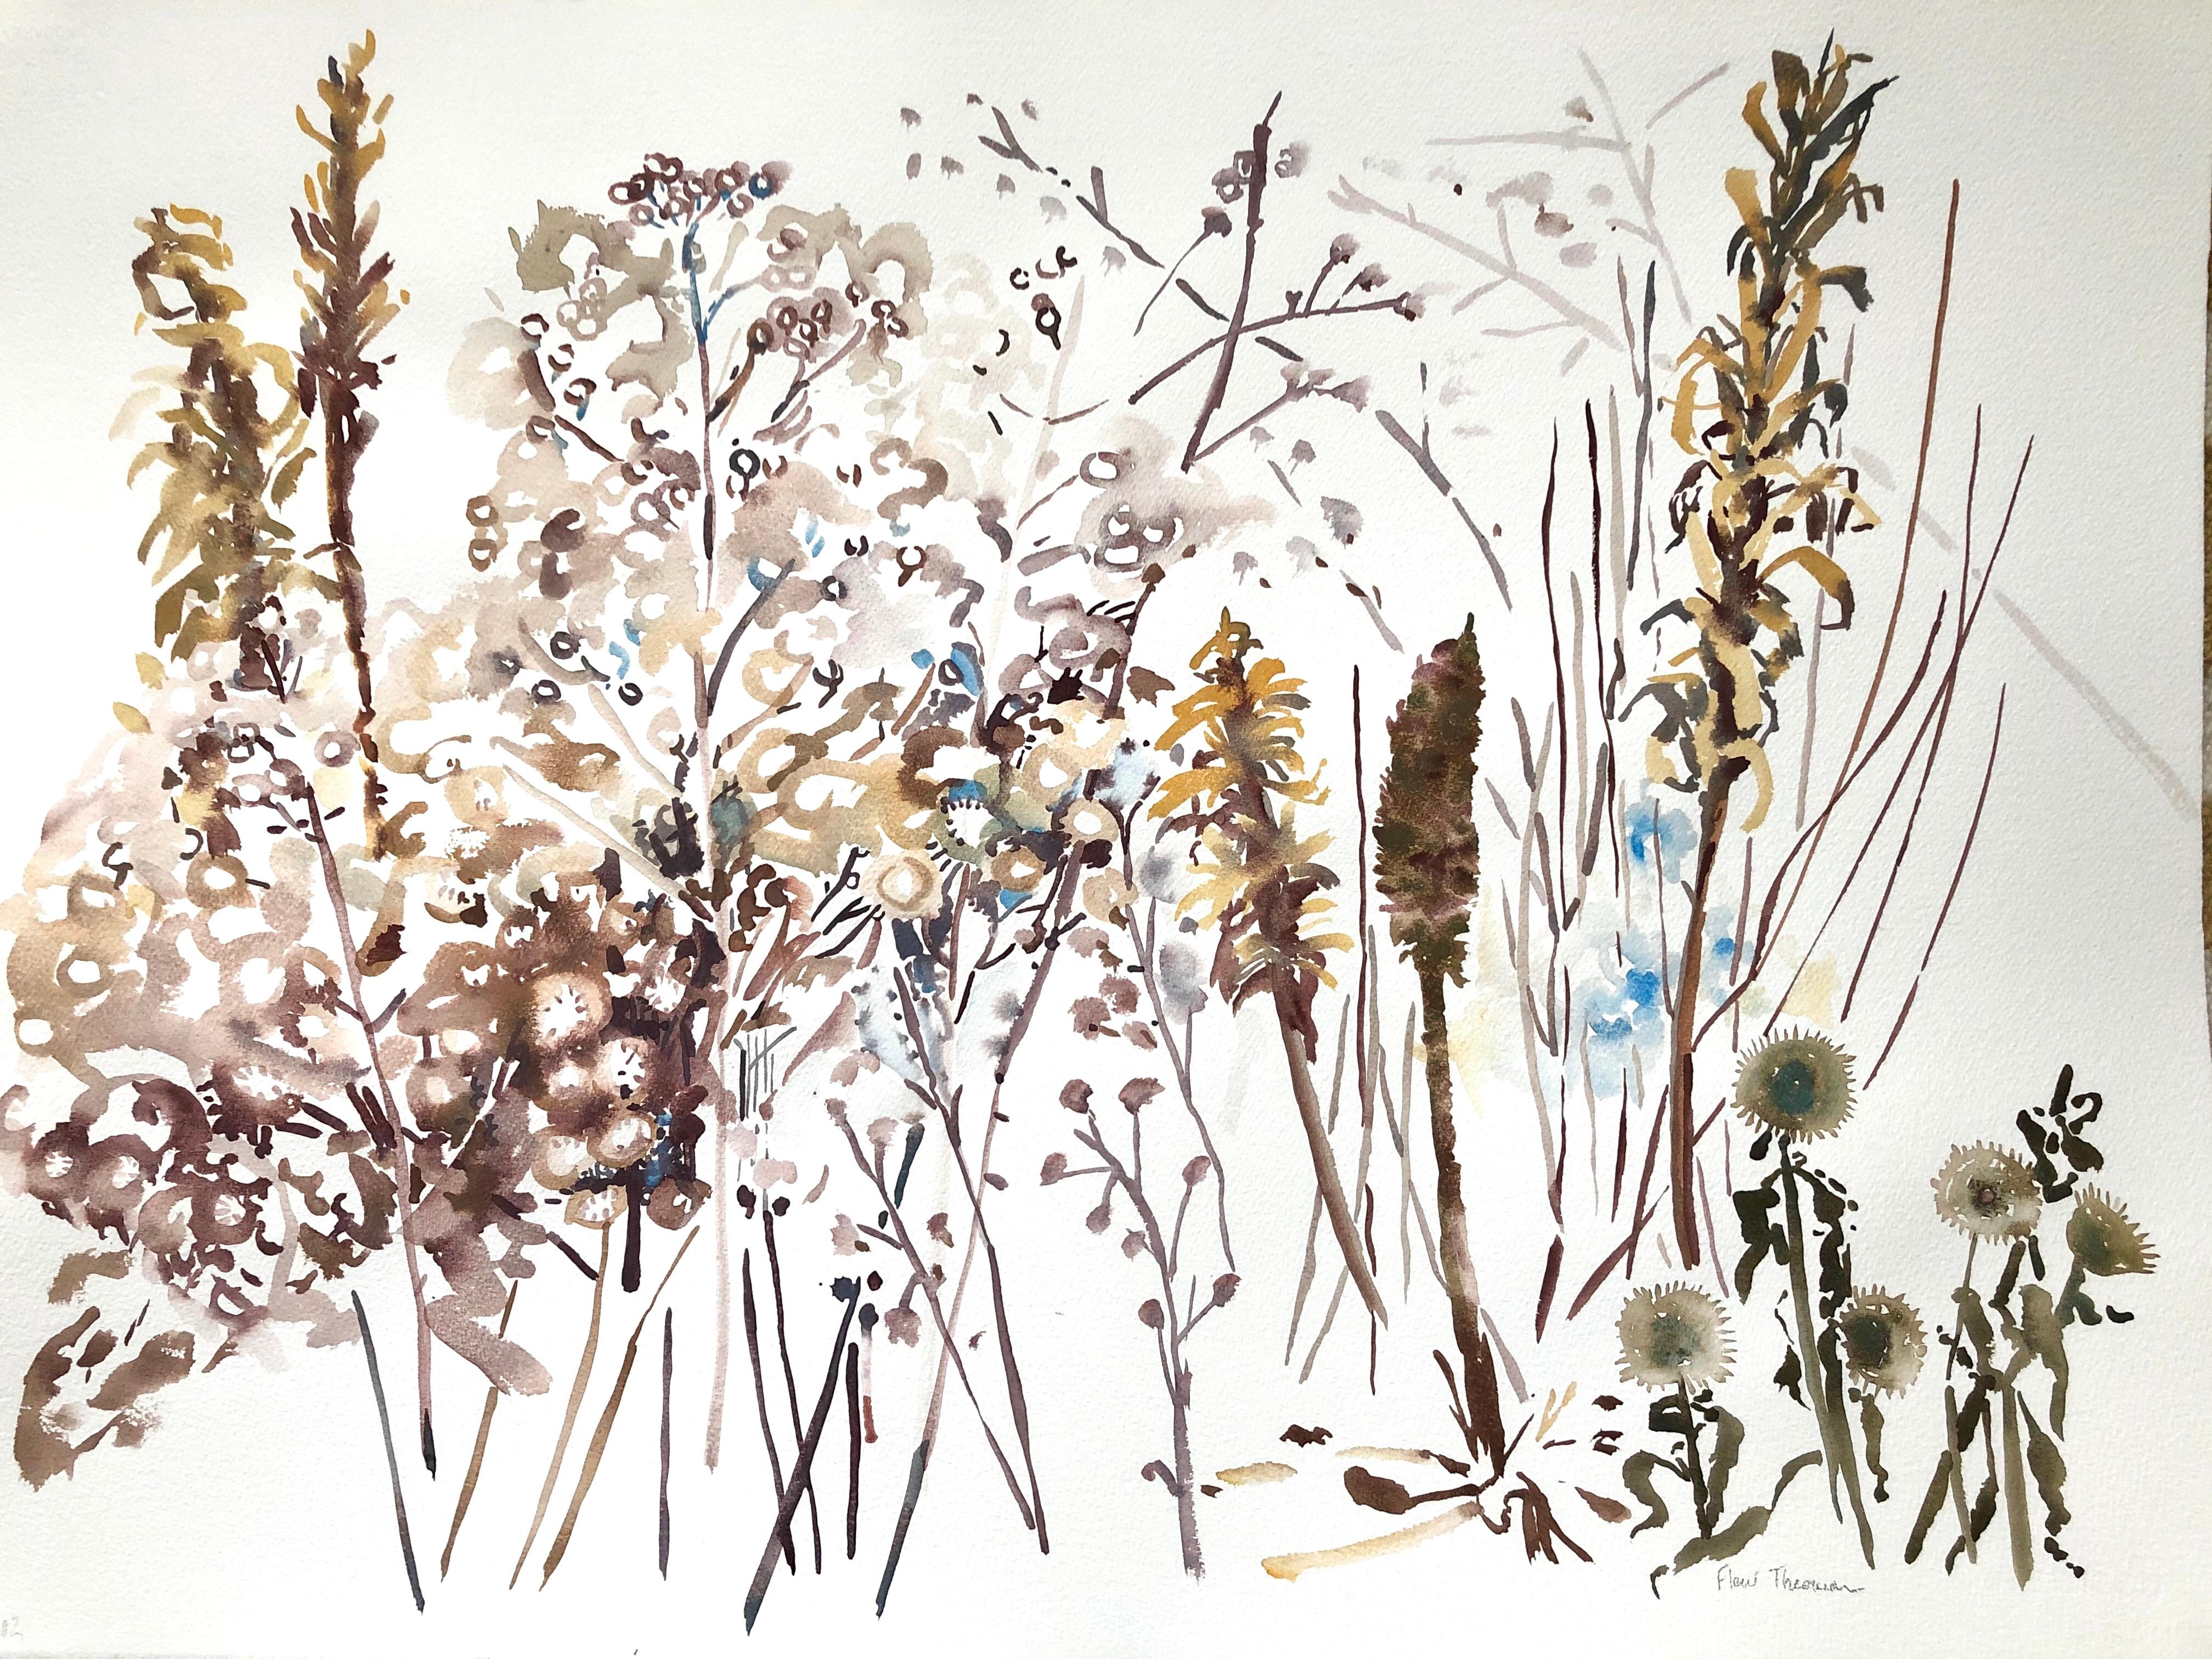 "WINTER SEEDS 4", watercolor, new england, snow, wild flowers, seeds, white, ice